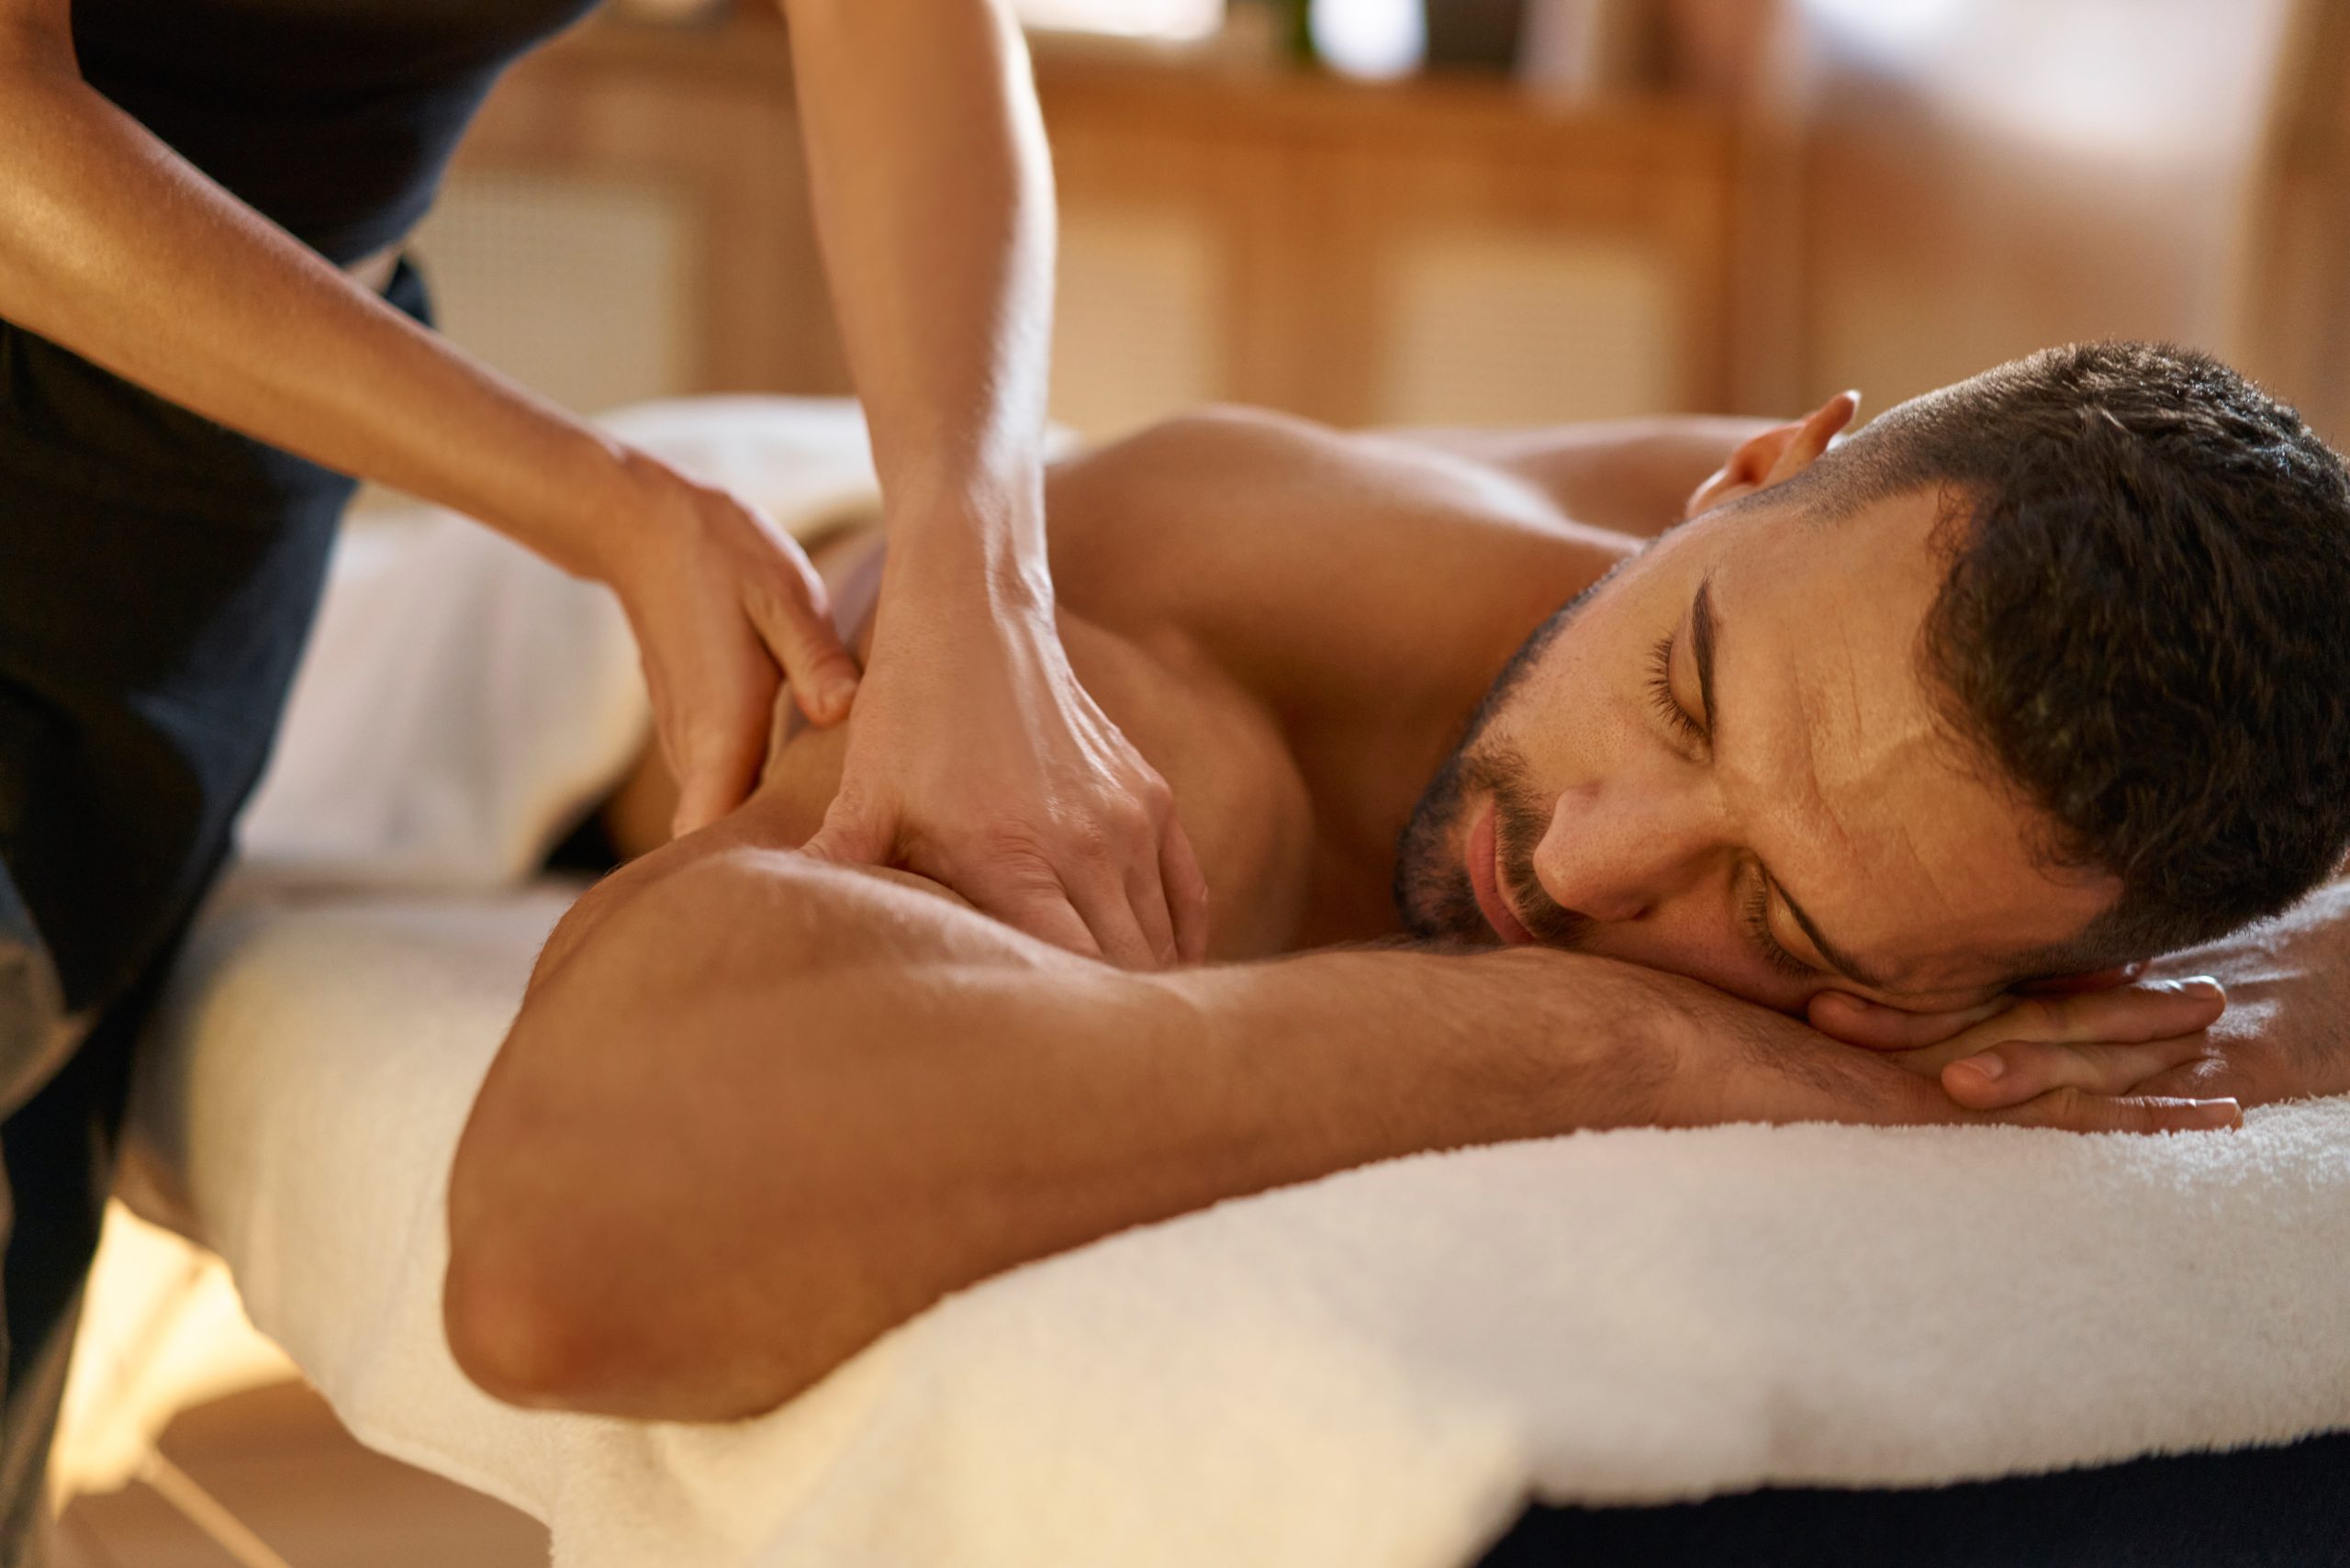 Is there anything I should do after a massage therapy session? faq - Massage Clinic